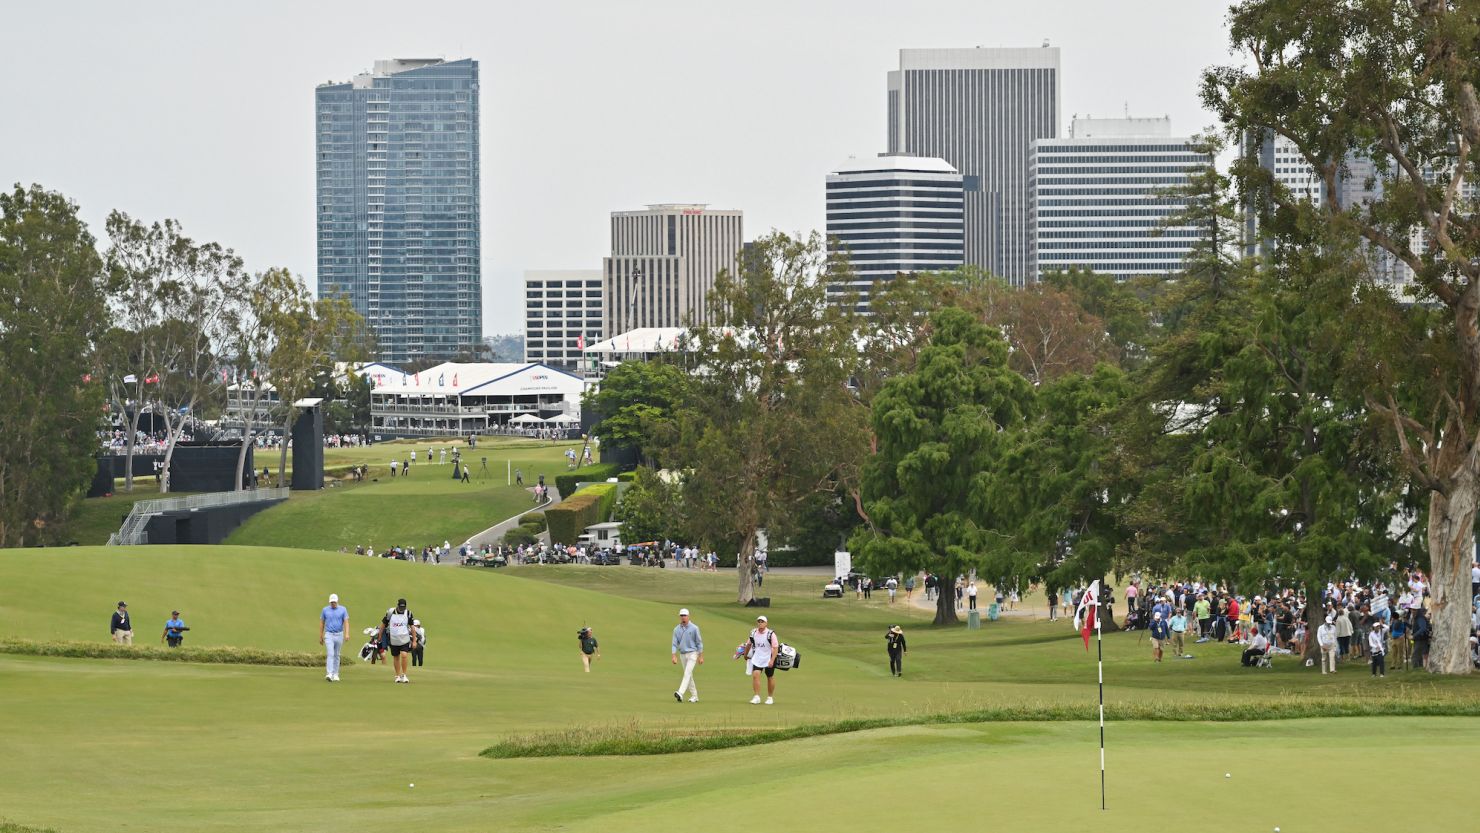 The first round of the 123rd US Open got underway at Los Angeles Country Club, California on Thursday.